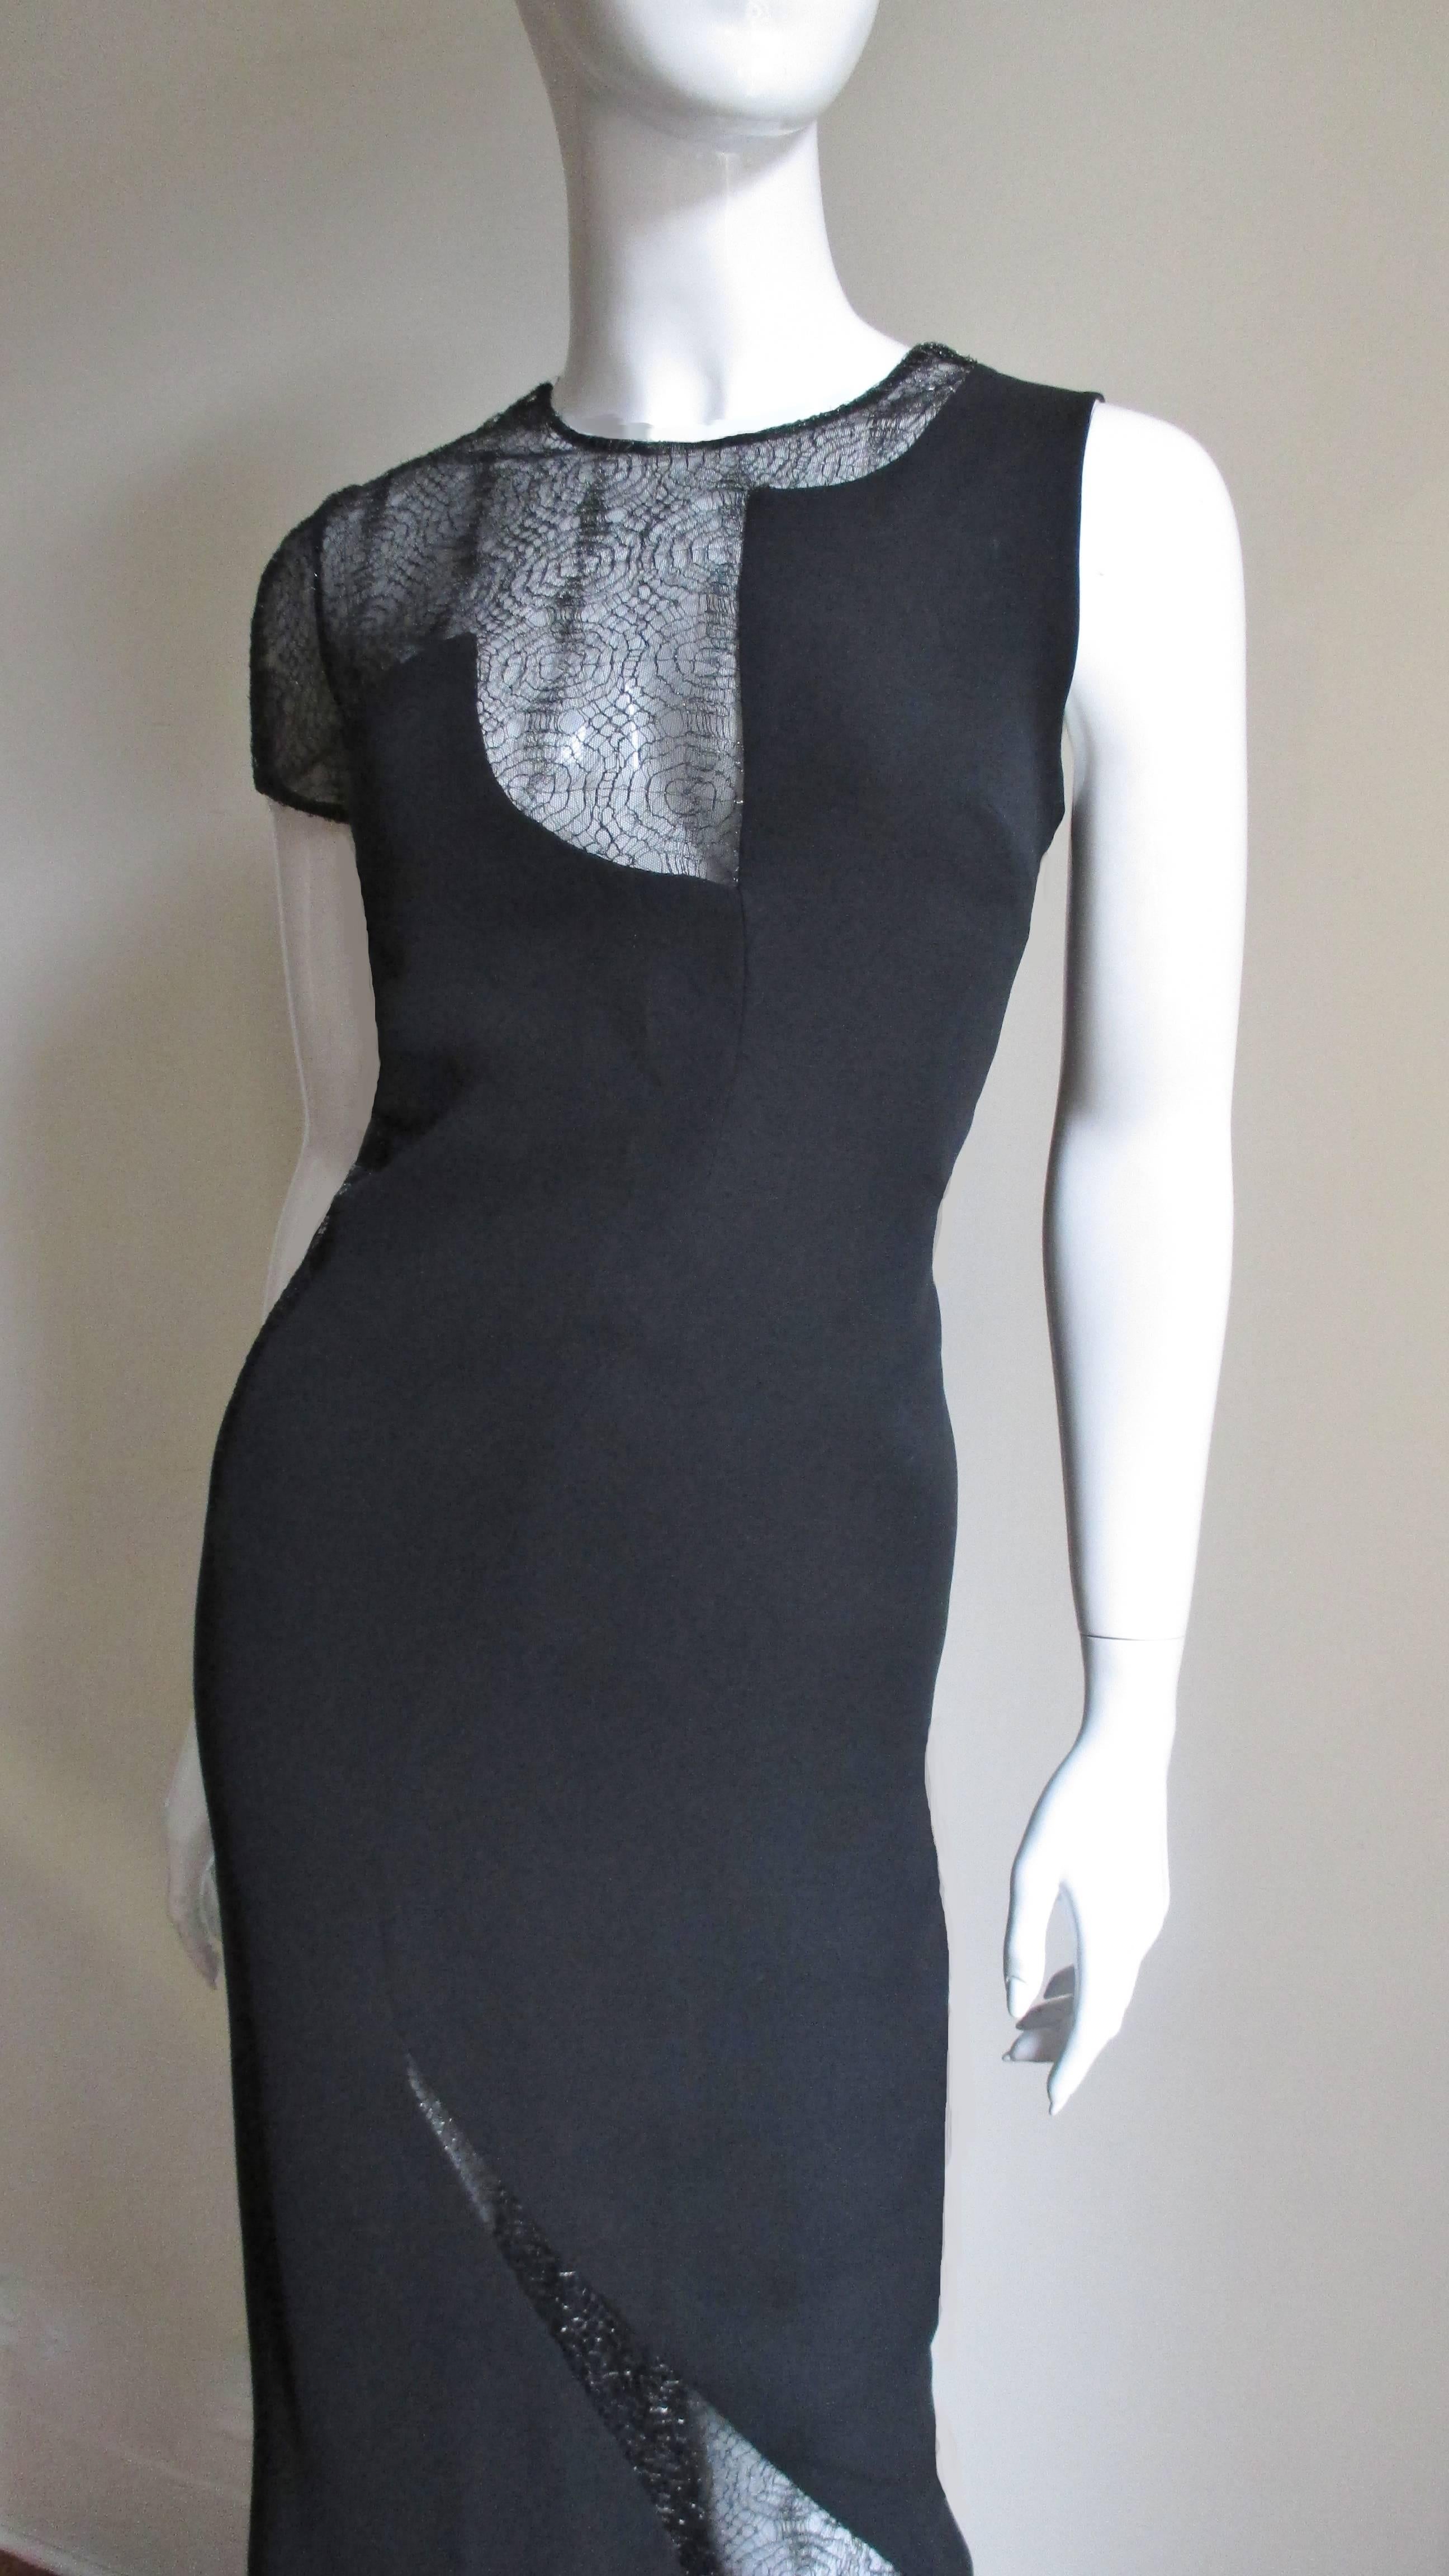 Women's 1990s Gianni Versace Asymmetric Gown with Lace Cutouts